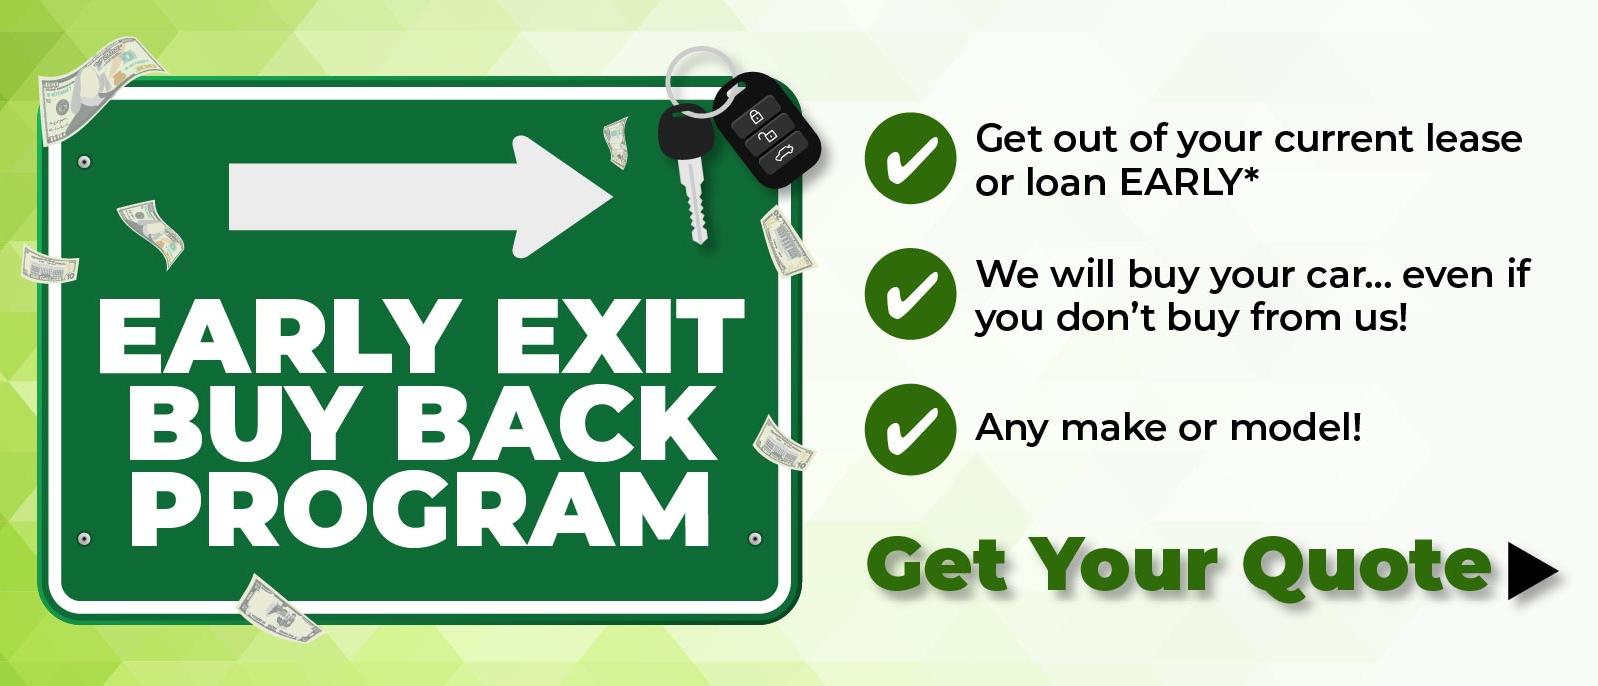 Early Exit Buy Back - Get our of your current lease or loan EARLY* / We will buy your car...even if you don't buy from us! / Any make or model!